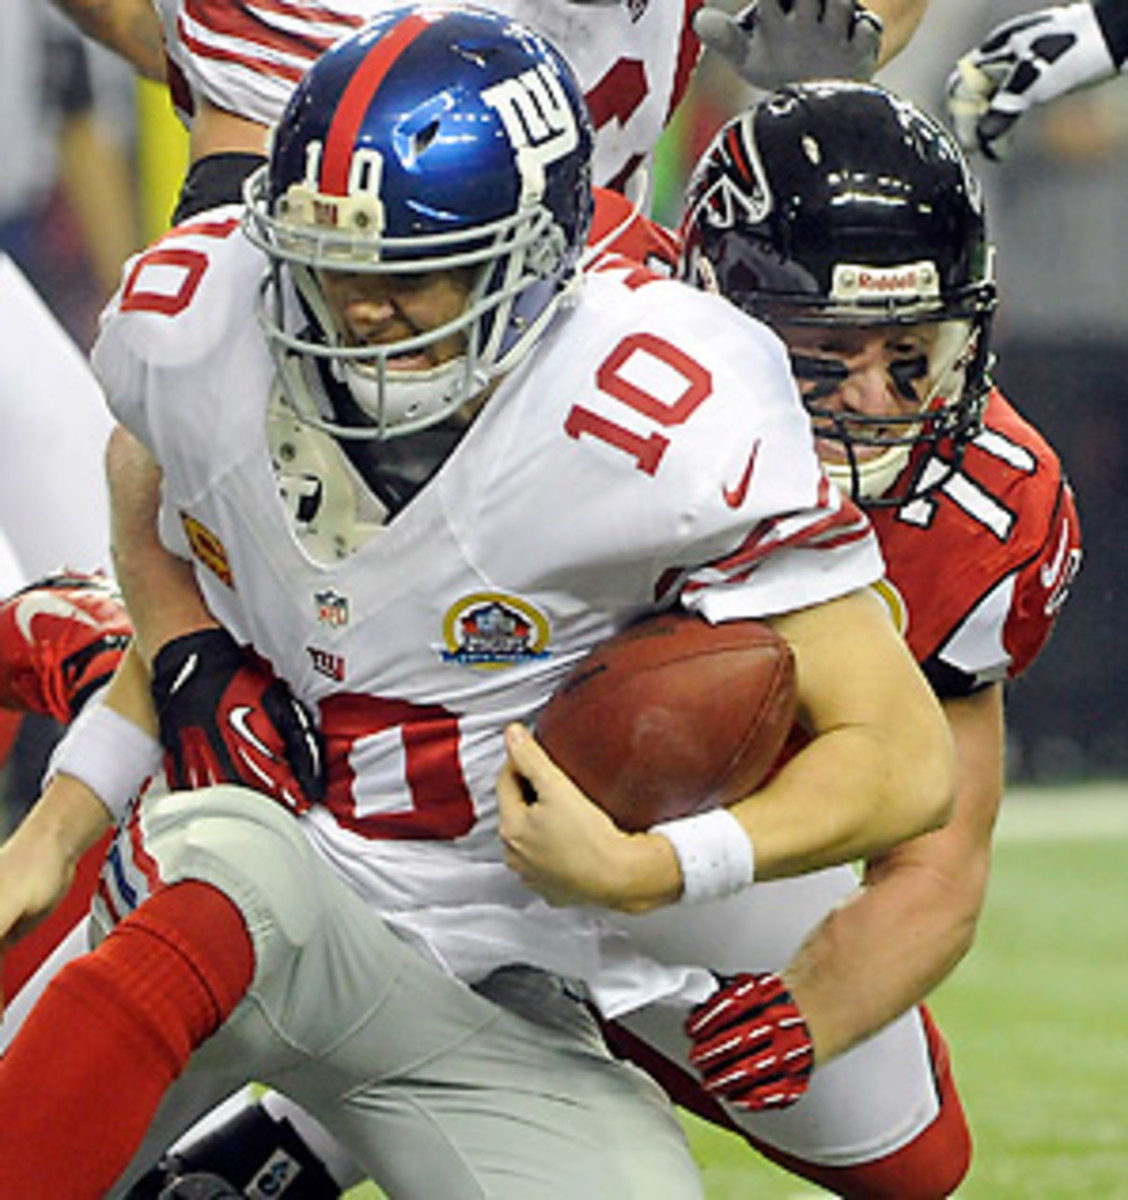 The Falcons kept the Giants scoreless for the first time in a regular season game since 1996. (John Amis/AP)